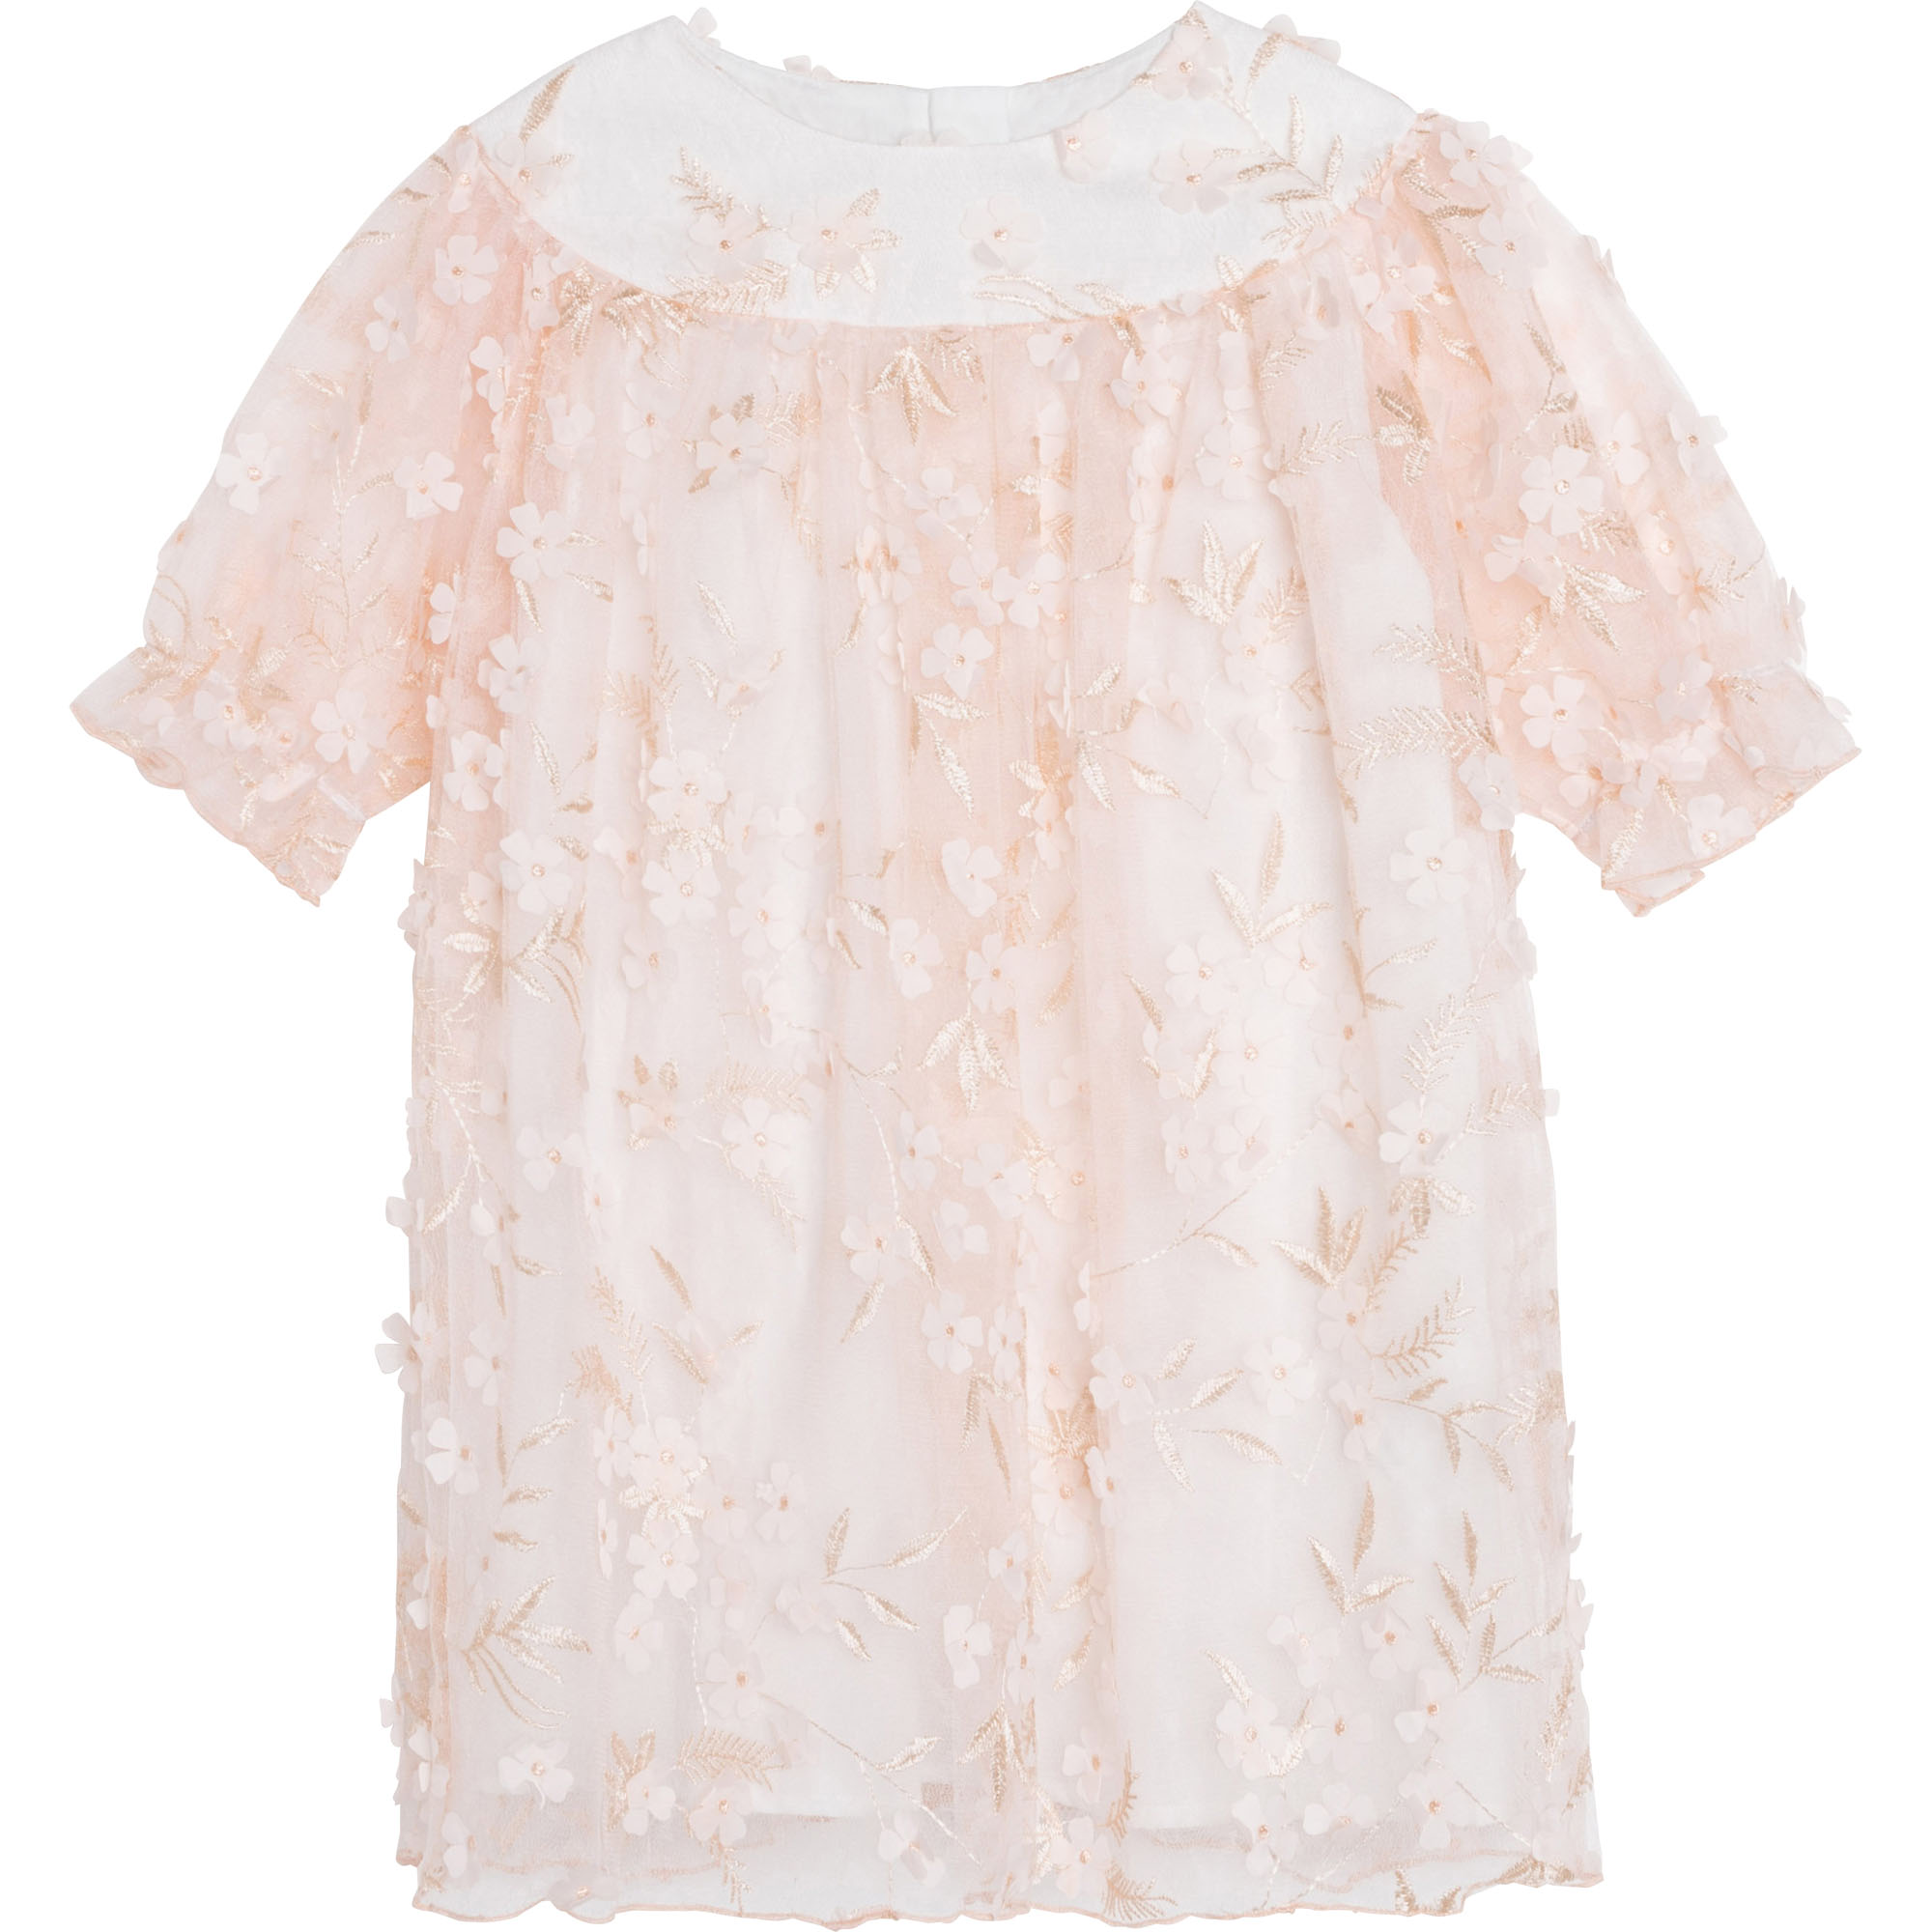 3D-flower lace dress CHARABIA for GIRL